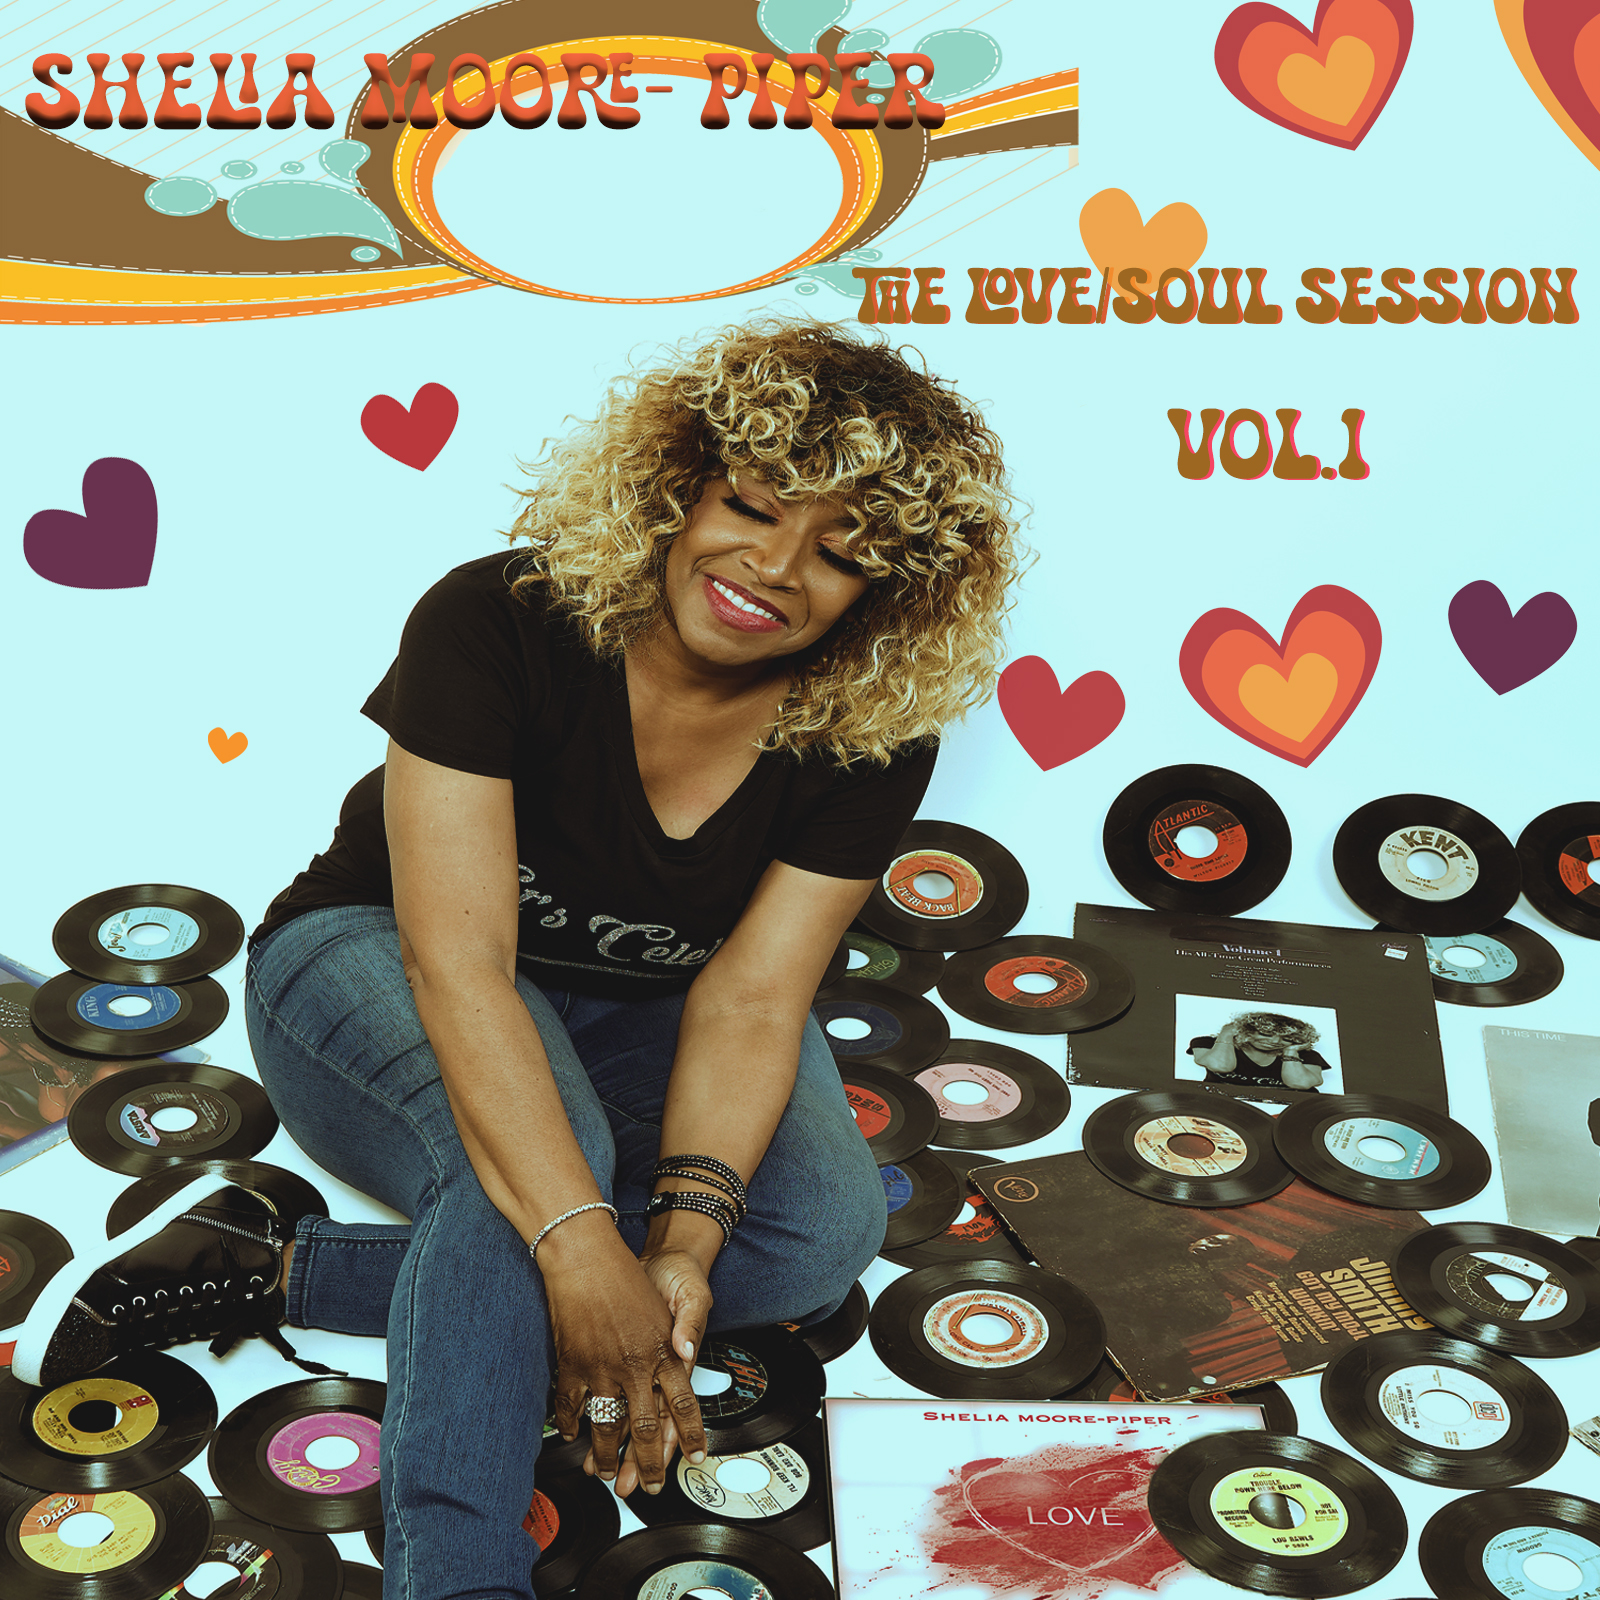 Art for Single Lady Feat: Tyrik Tell by Shelia Moore-Piper